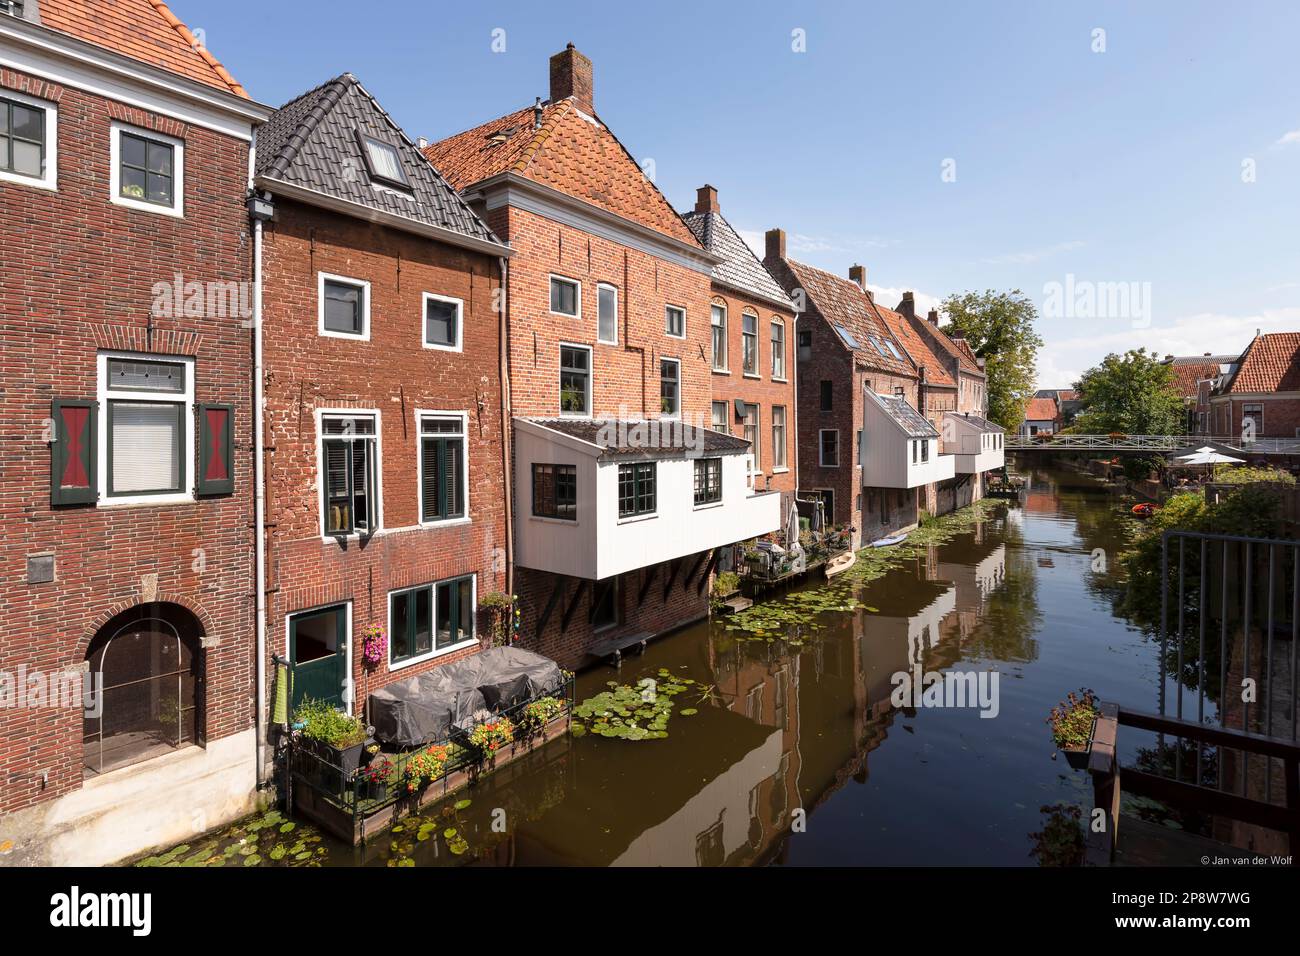 Old houses with attached kitchens above the canal in the picturesque town of Appingedam in the province of Groningen in the Netherlands. Stock Photo